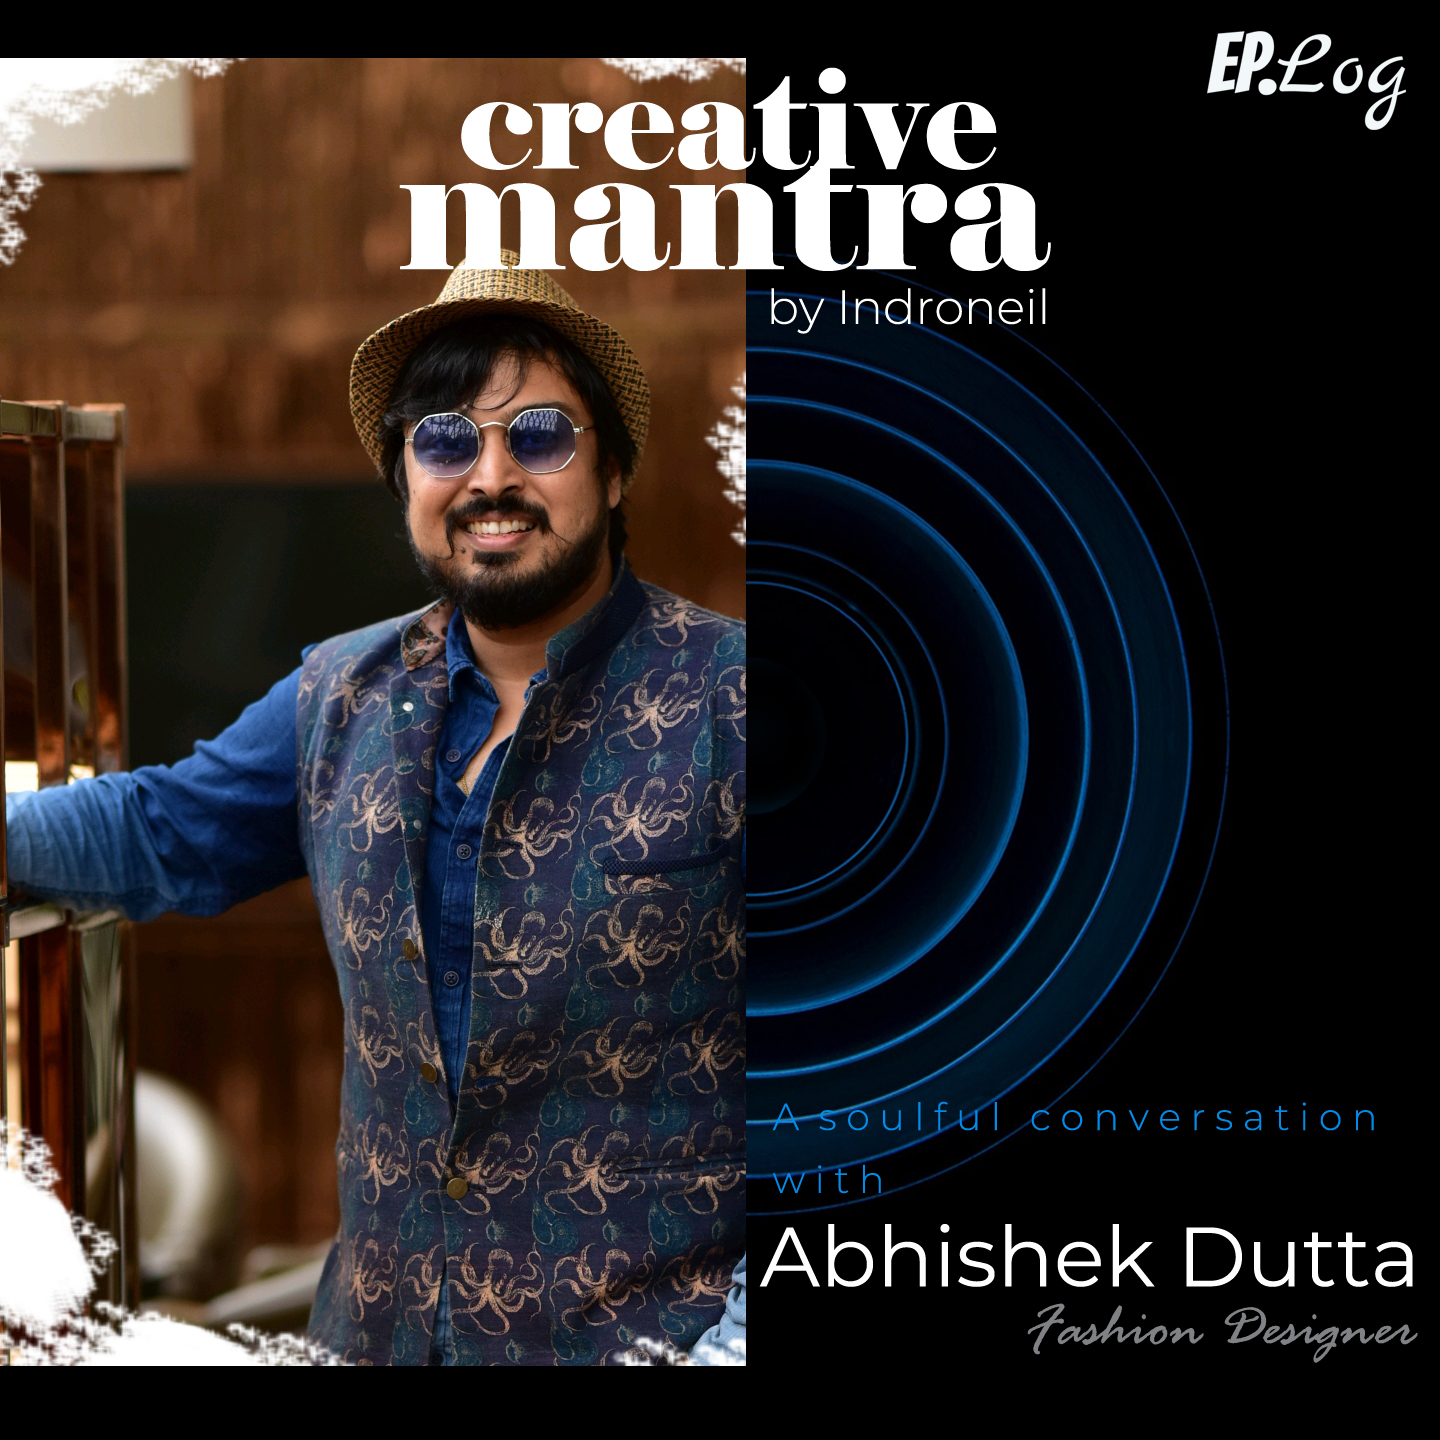 "By accident, I became a Fashion Designer. Knowledge of Science helped me to design my labels" - An inspirational talk with Fashion Designer Abhishek Dutta